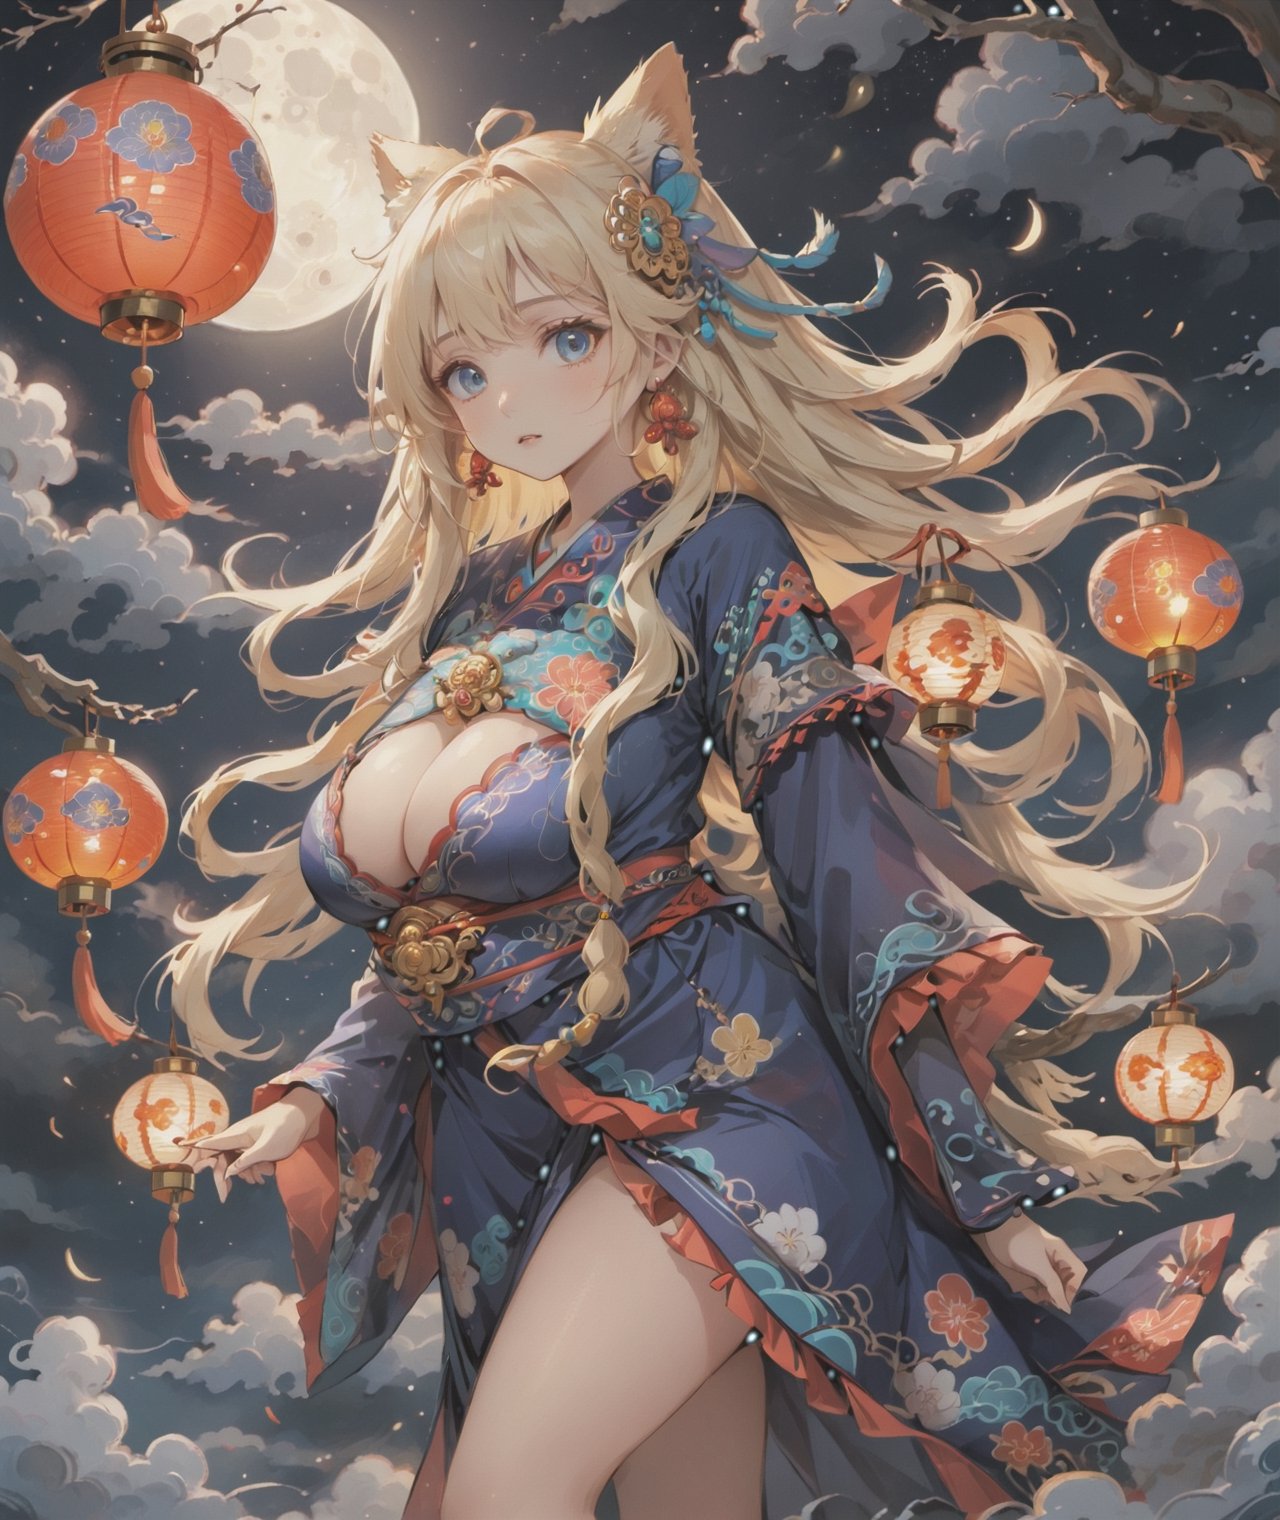 ((anime style)),  masterpiece, 4K, 1 blonde girl with long hair wearing a traditional Asian dress holding a lantern, large breasts and detail eyes looking at viewers, more detail XL, SFW,  nighttime, moonlight, walking pose, mythical clouds